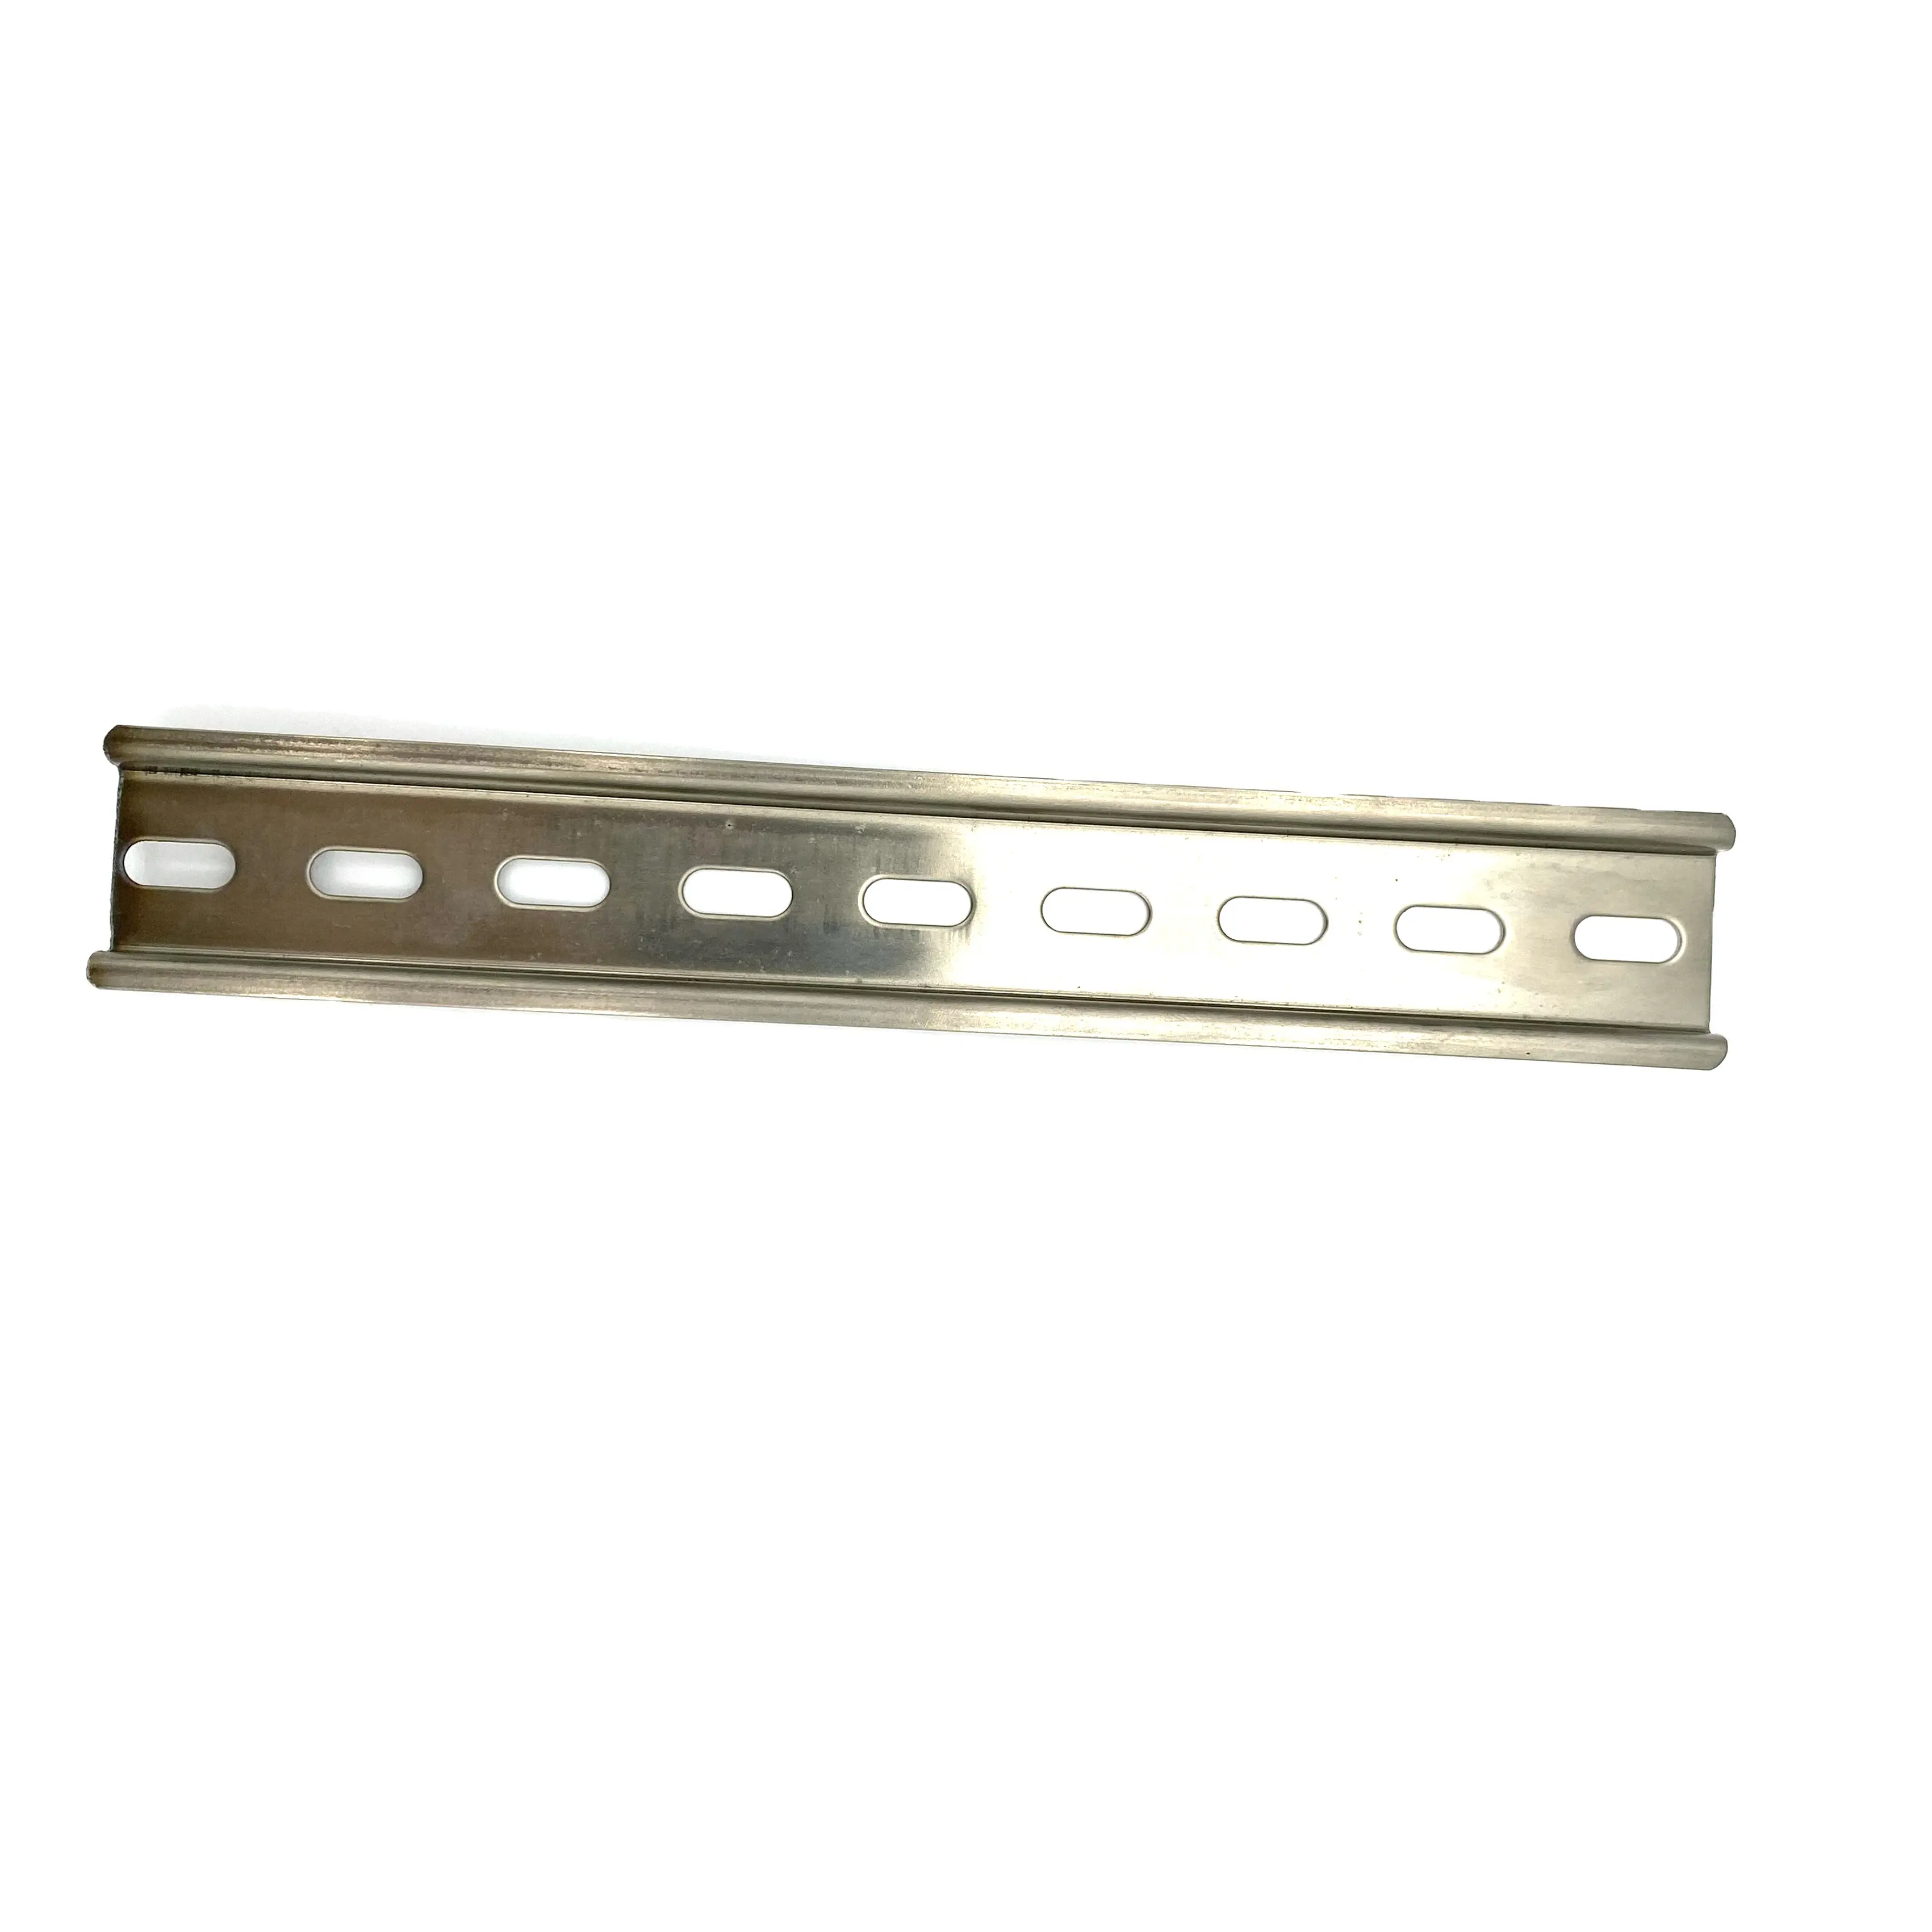 high quality din rail stainless steel 1mm thickness SS304 light rail track 6.2mm bolt hole